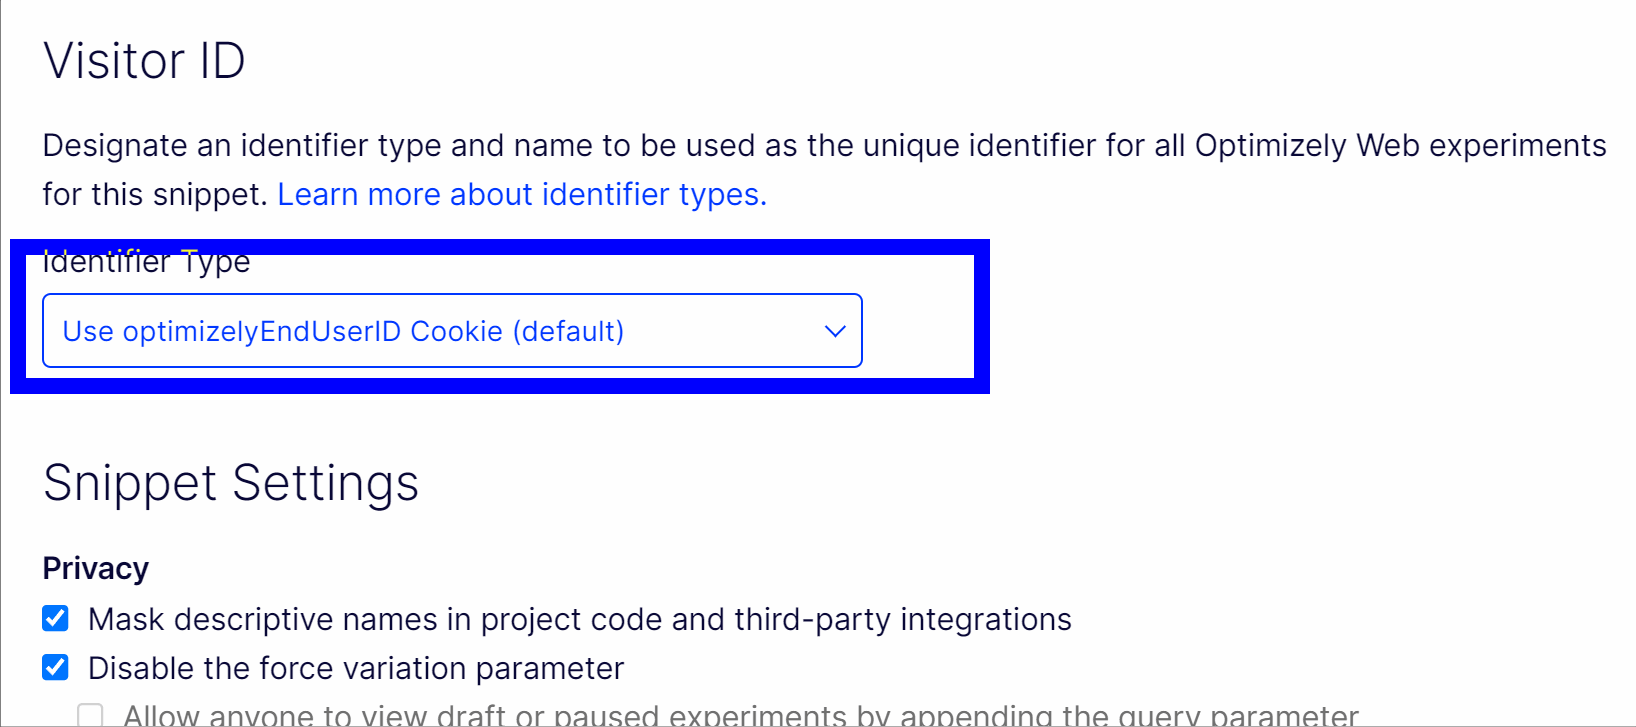 How Does The Optimizely Web Bring Your Own ID Work?